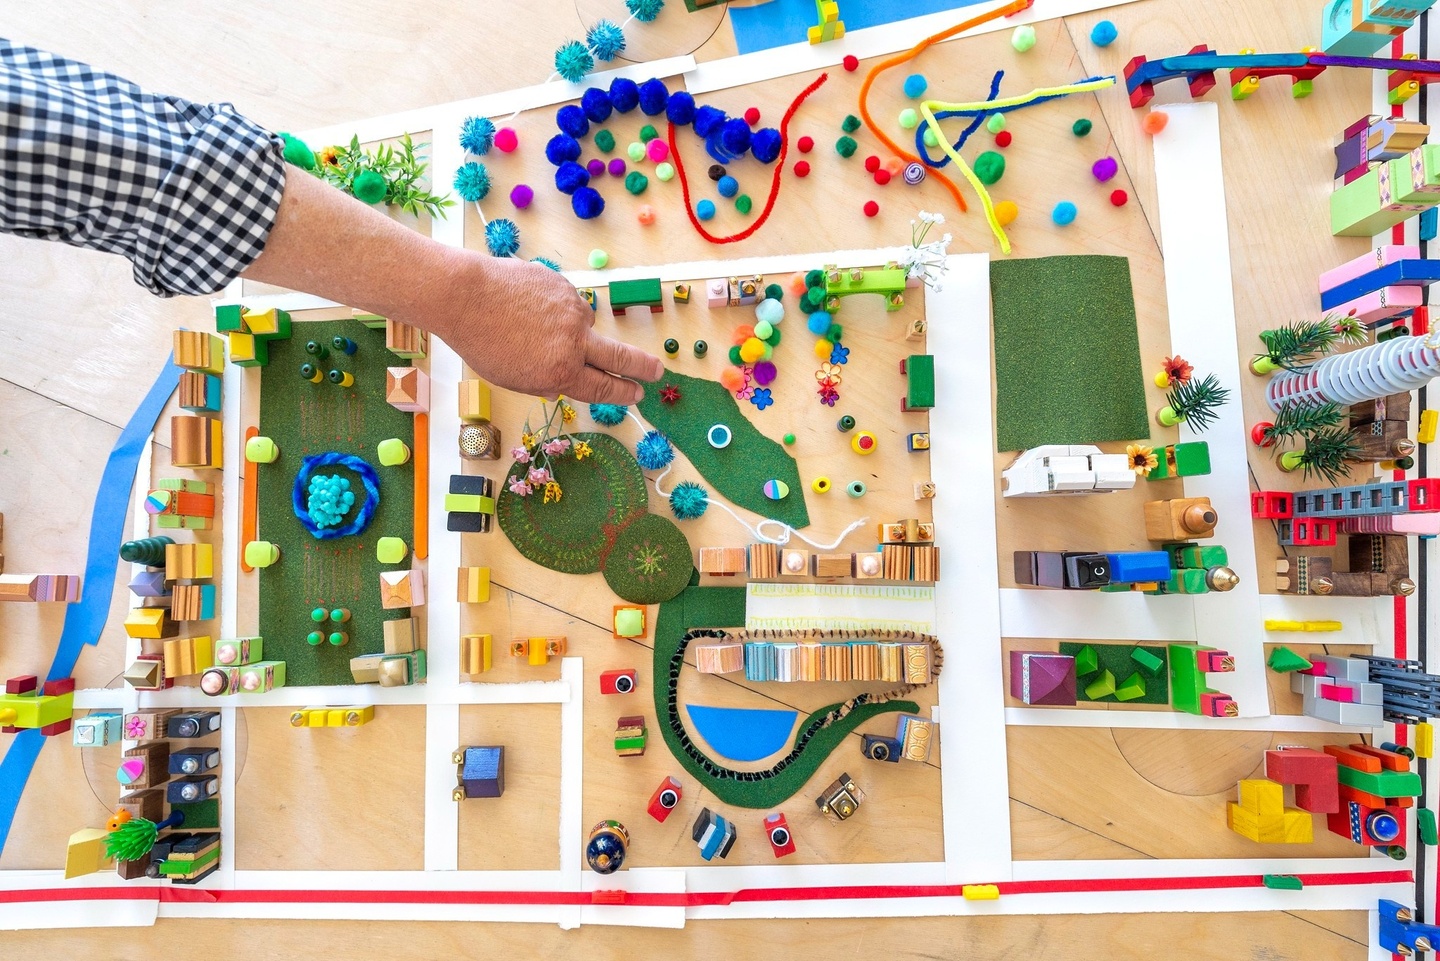 Birds eye view of a city layout made from colorful materials with a hand placing down a piece of green felt